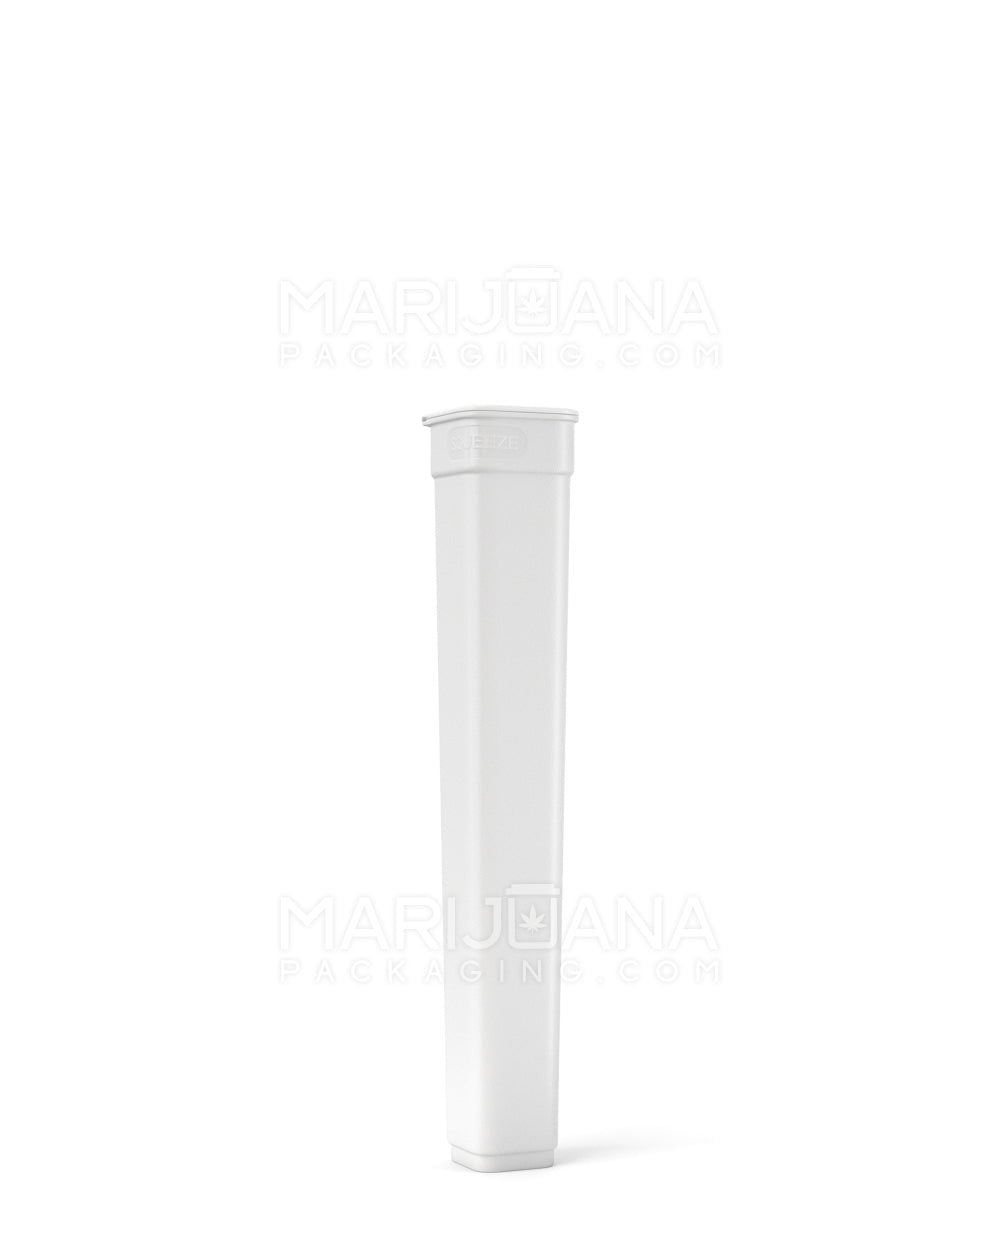 POLLEN GEAR | 100% Recyclable Opaque Pop Box Pop Top Plastic Pre-Roll Tubes | 119mm - White - 1840 Count - 4